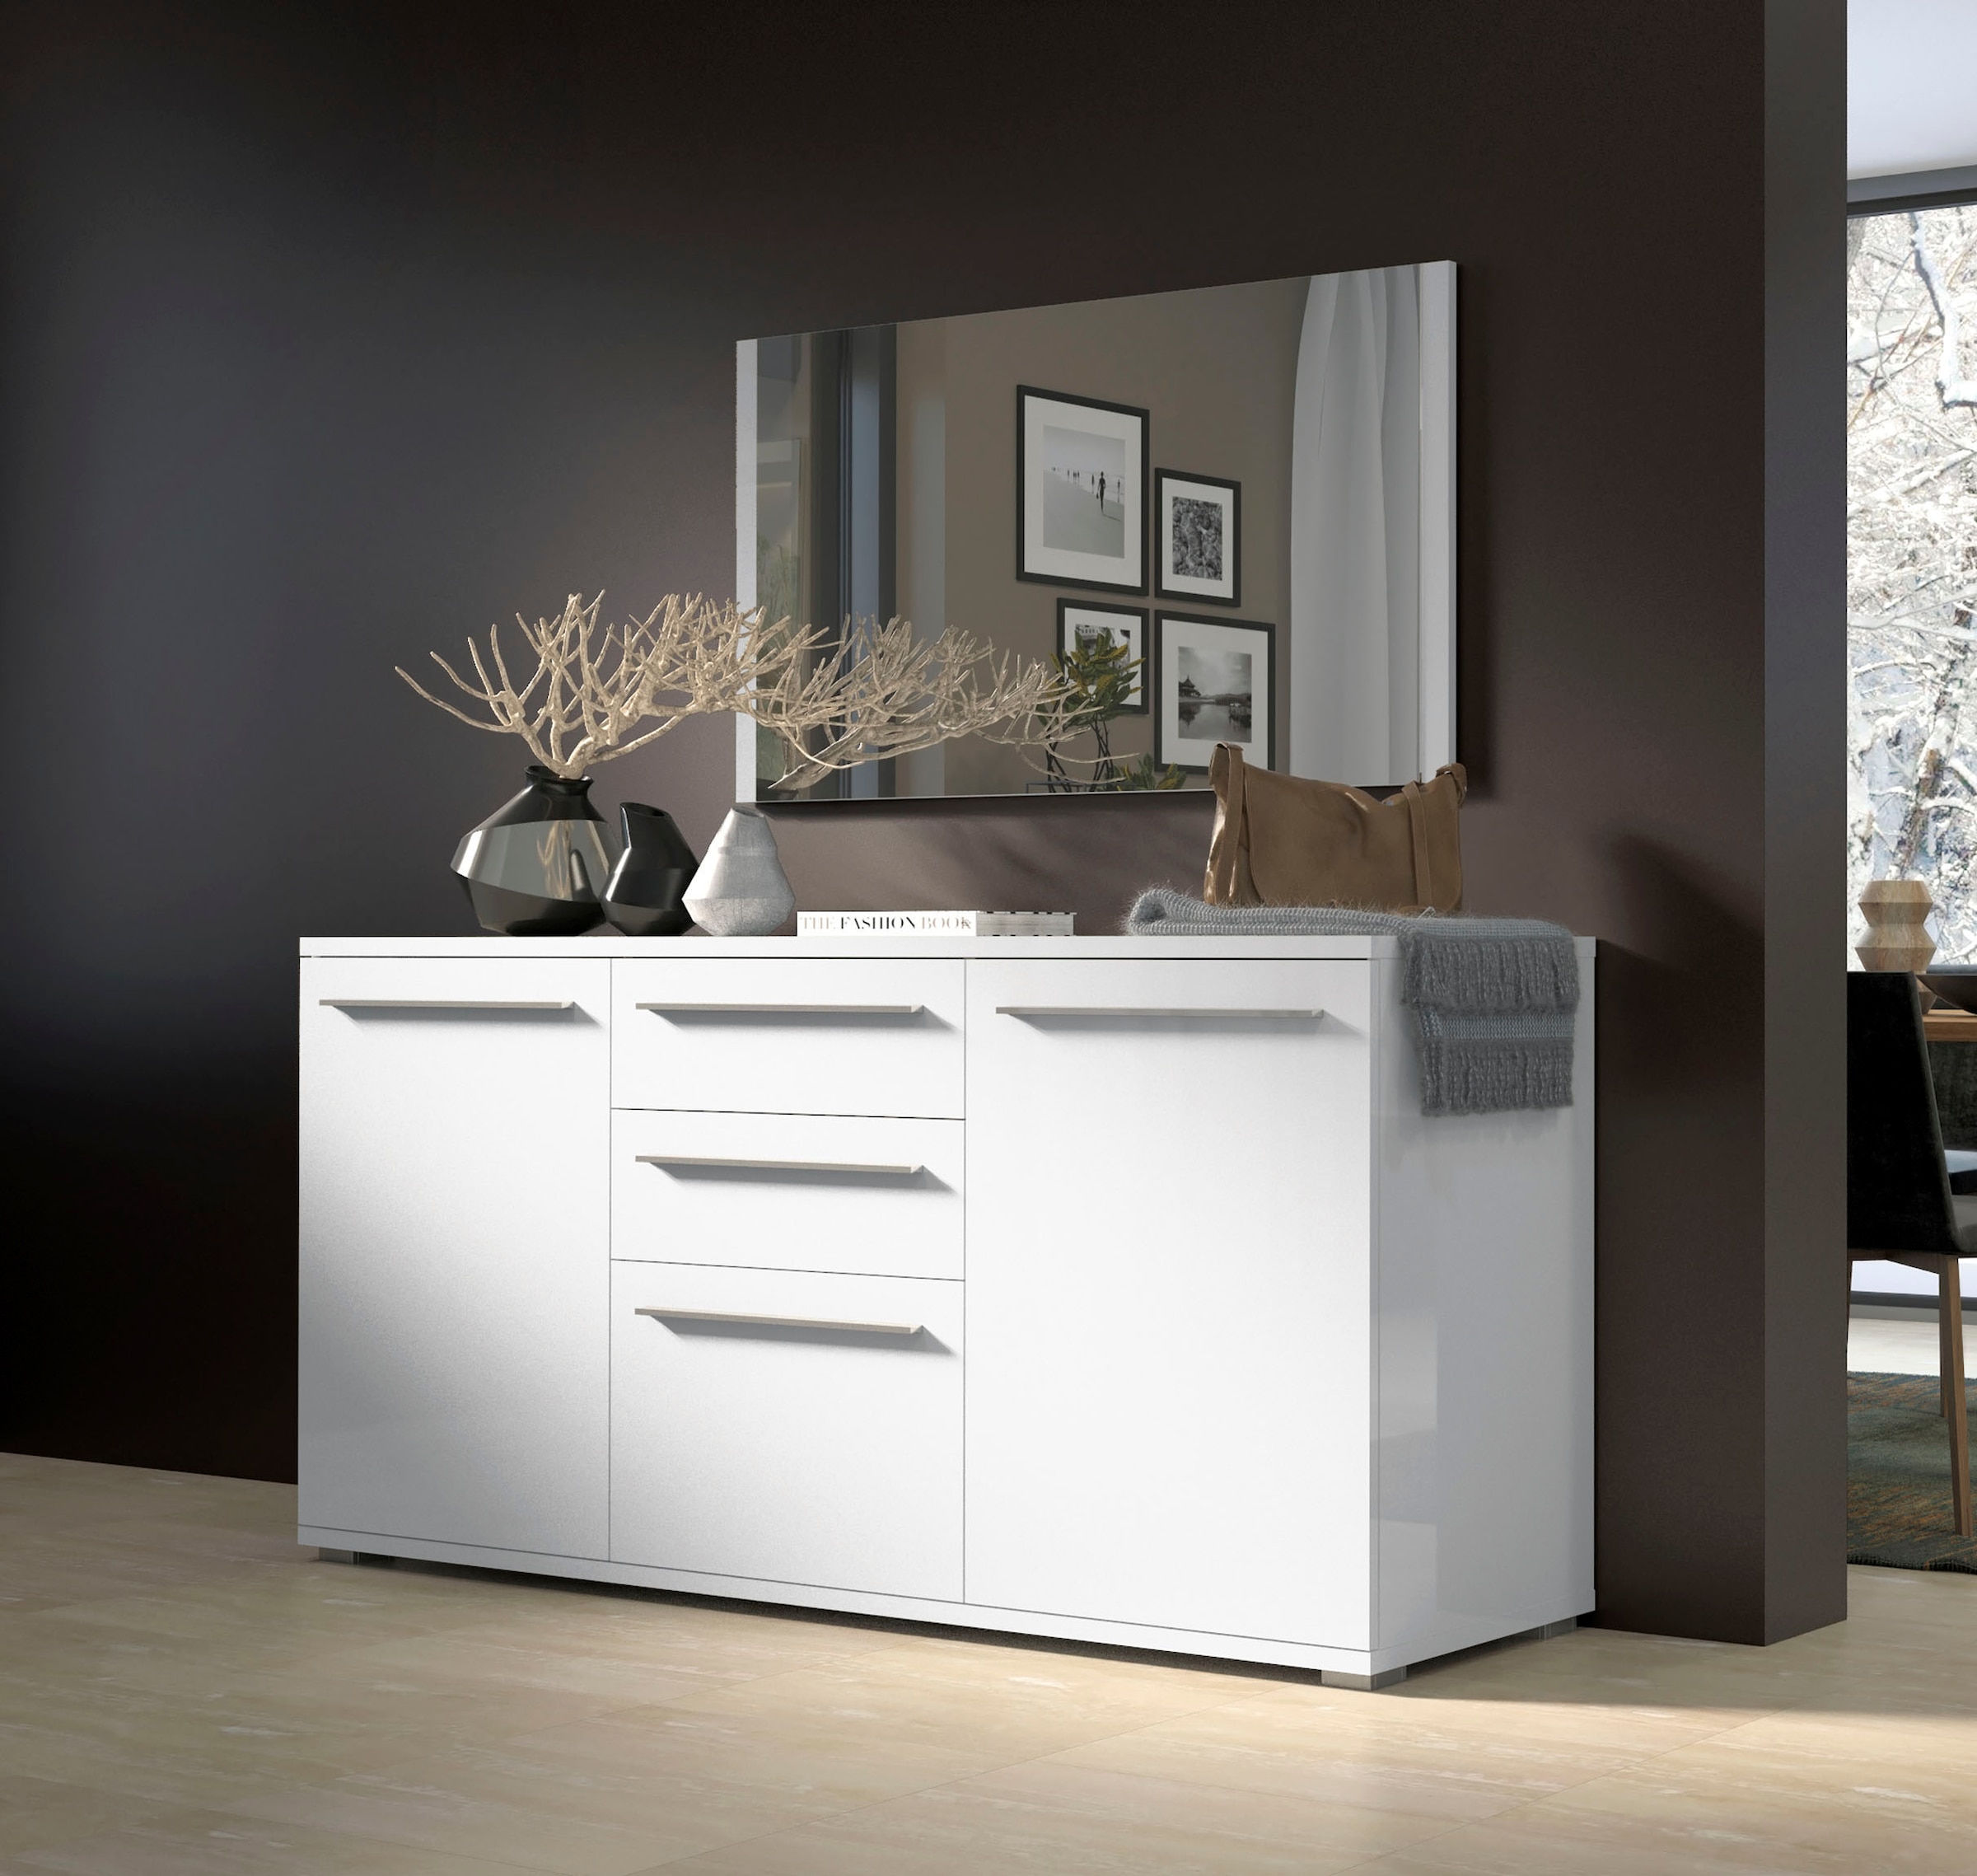 Places of Soft-Close lackiert, bestellen »Piano«, UV online Kommode Hochglanz Funktion Style